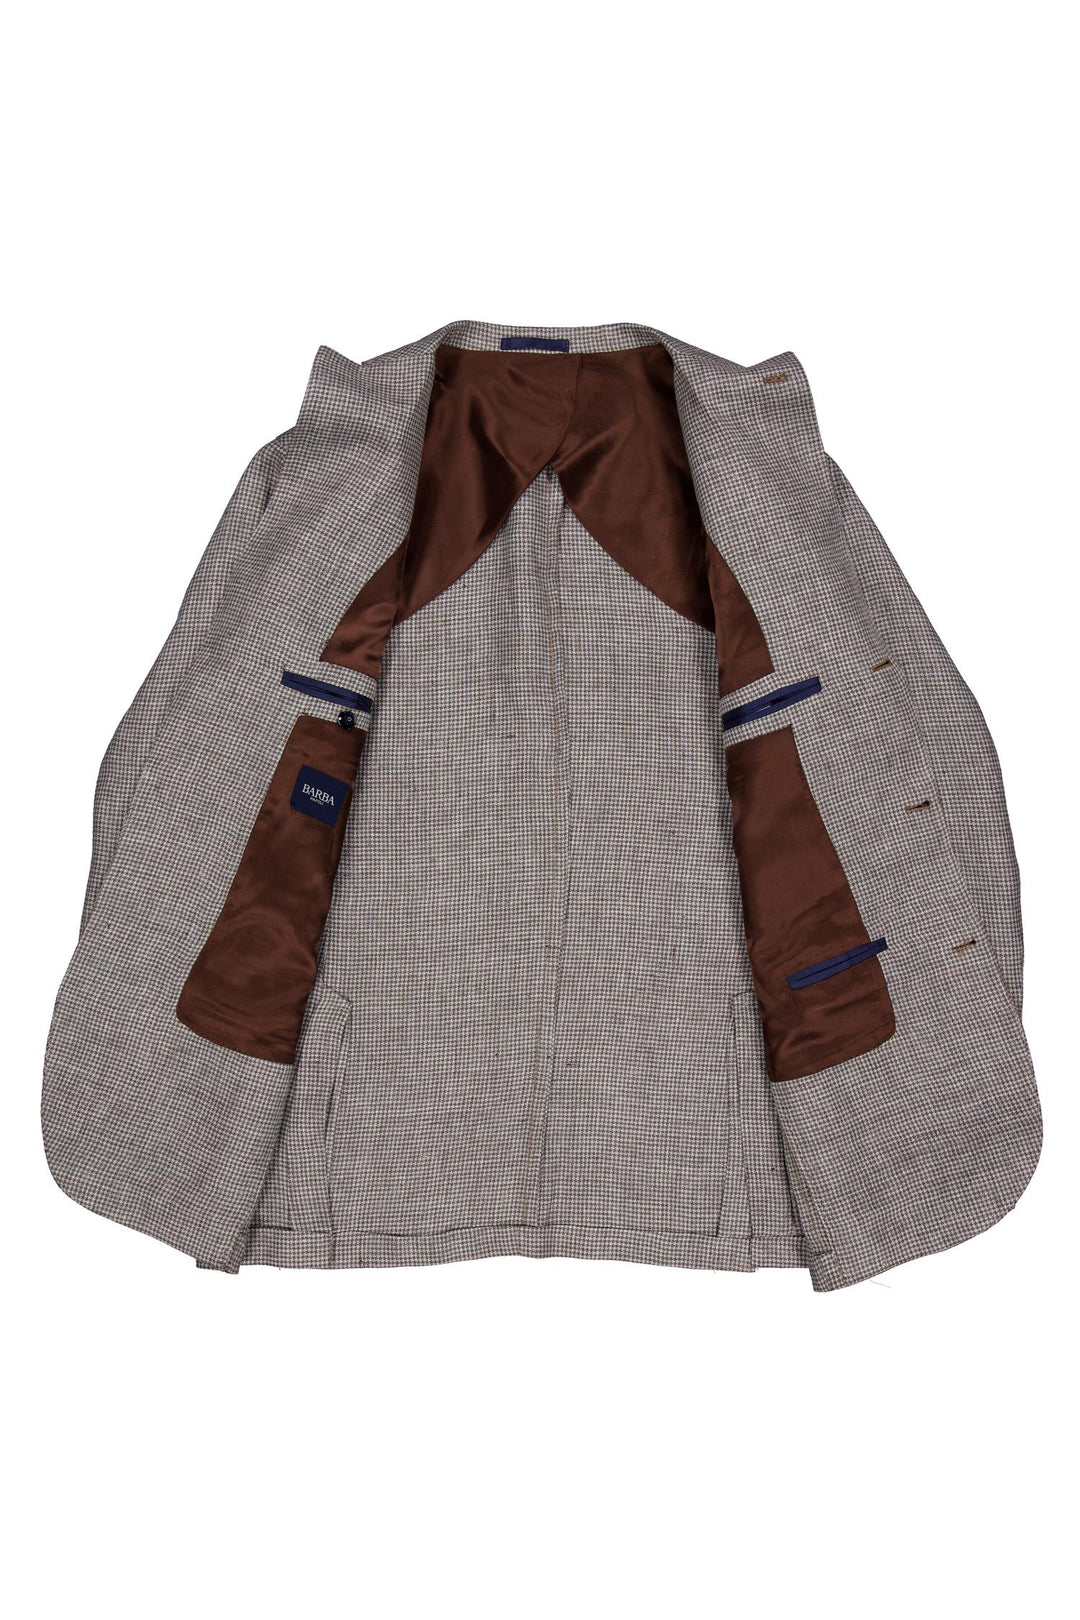 Jimmy Linen Jacket Brown Houndstooth